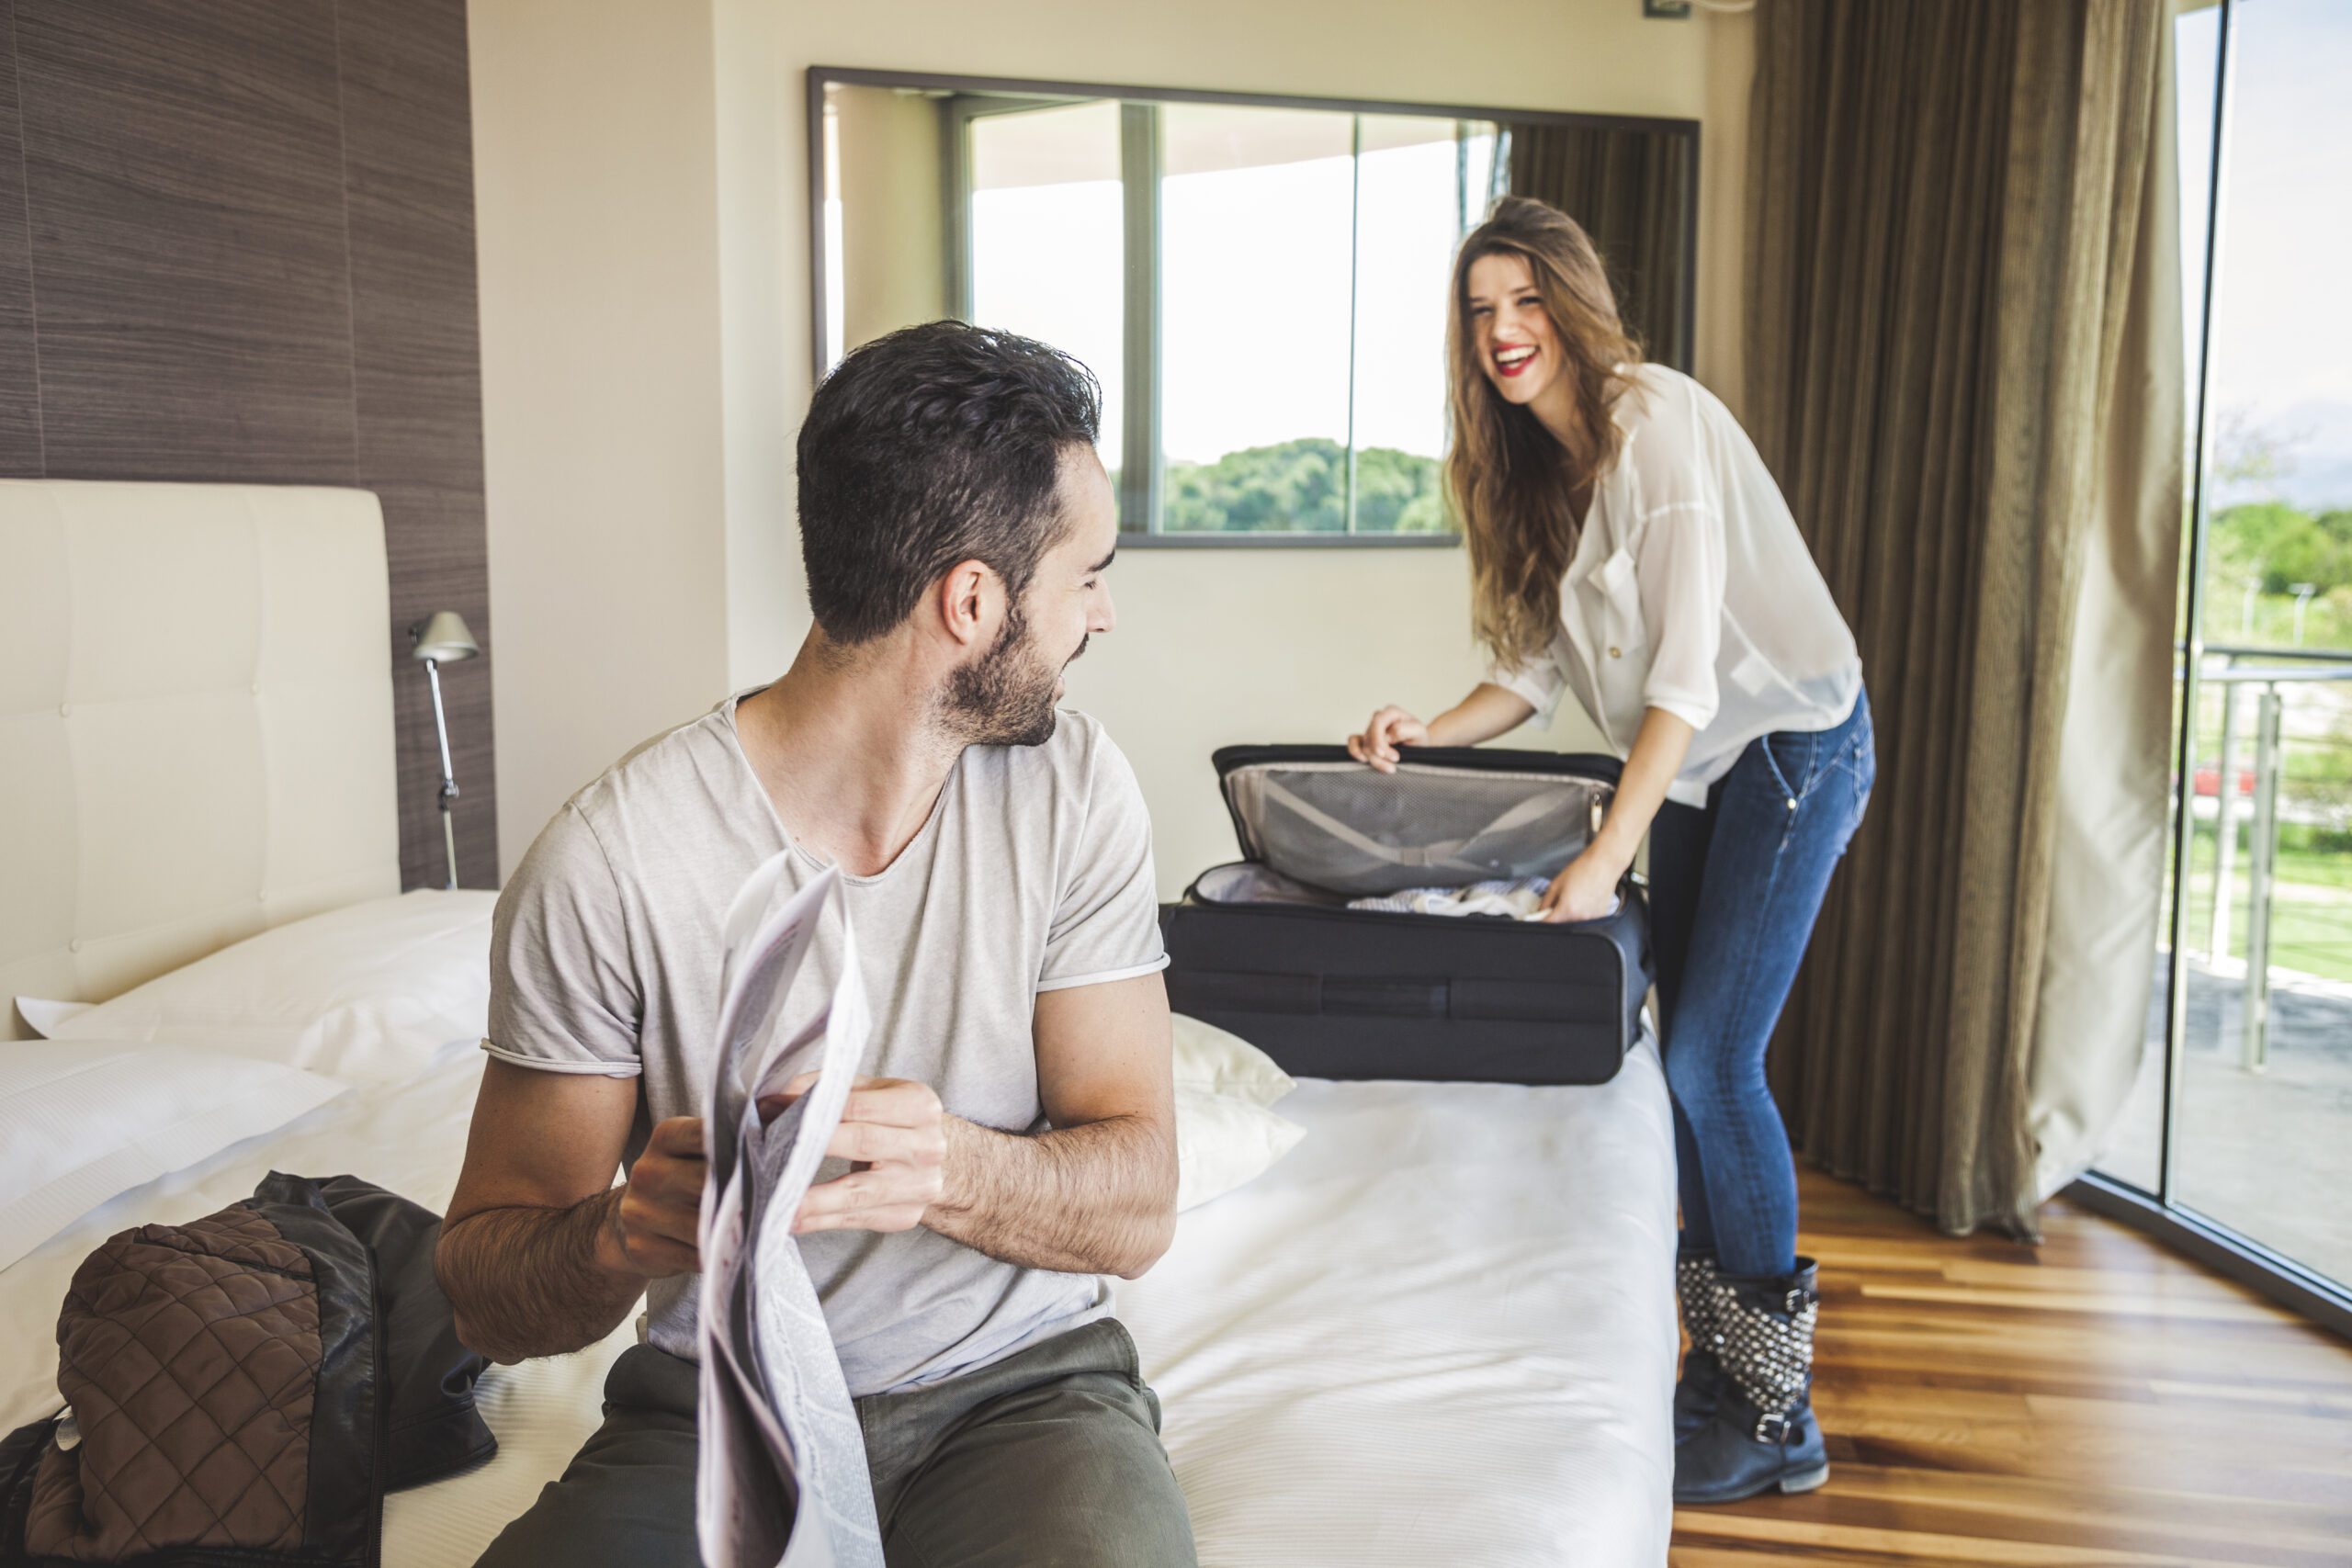 A man sitting on a bed looks back at his female partner who is unpacking a suitcase and laughing.